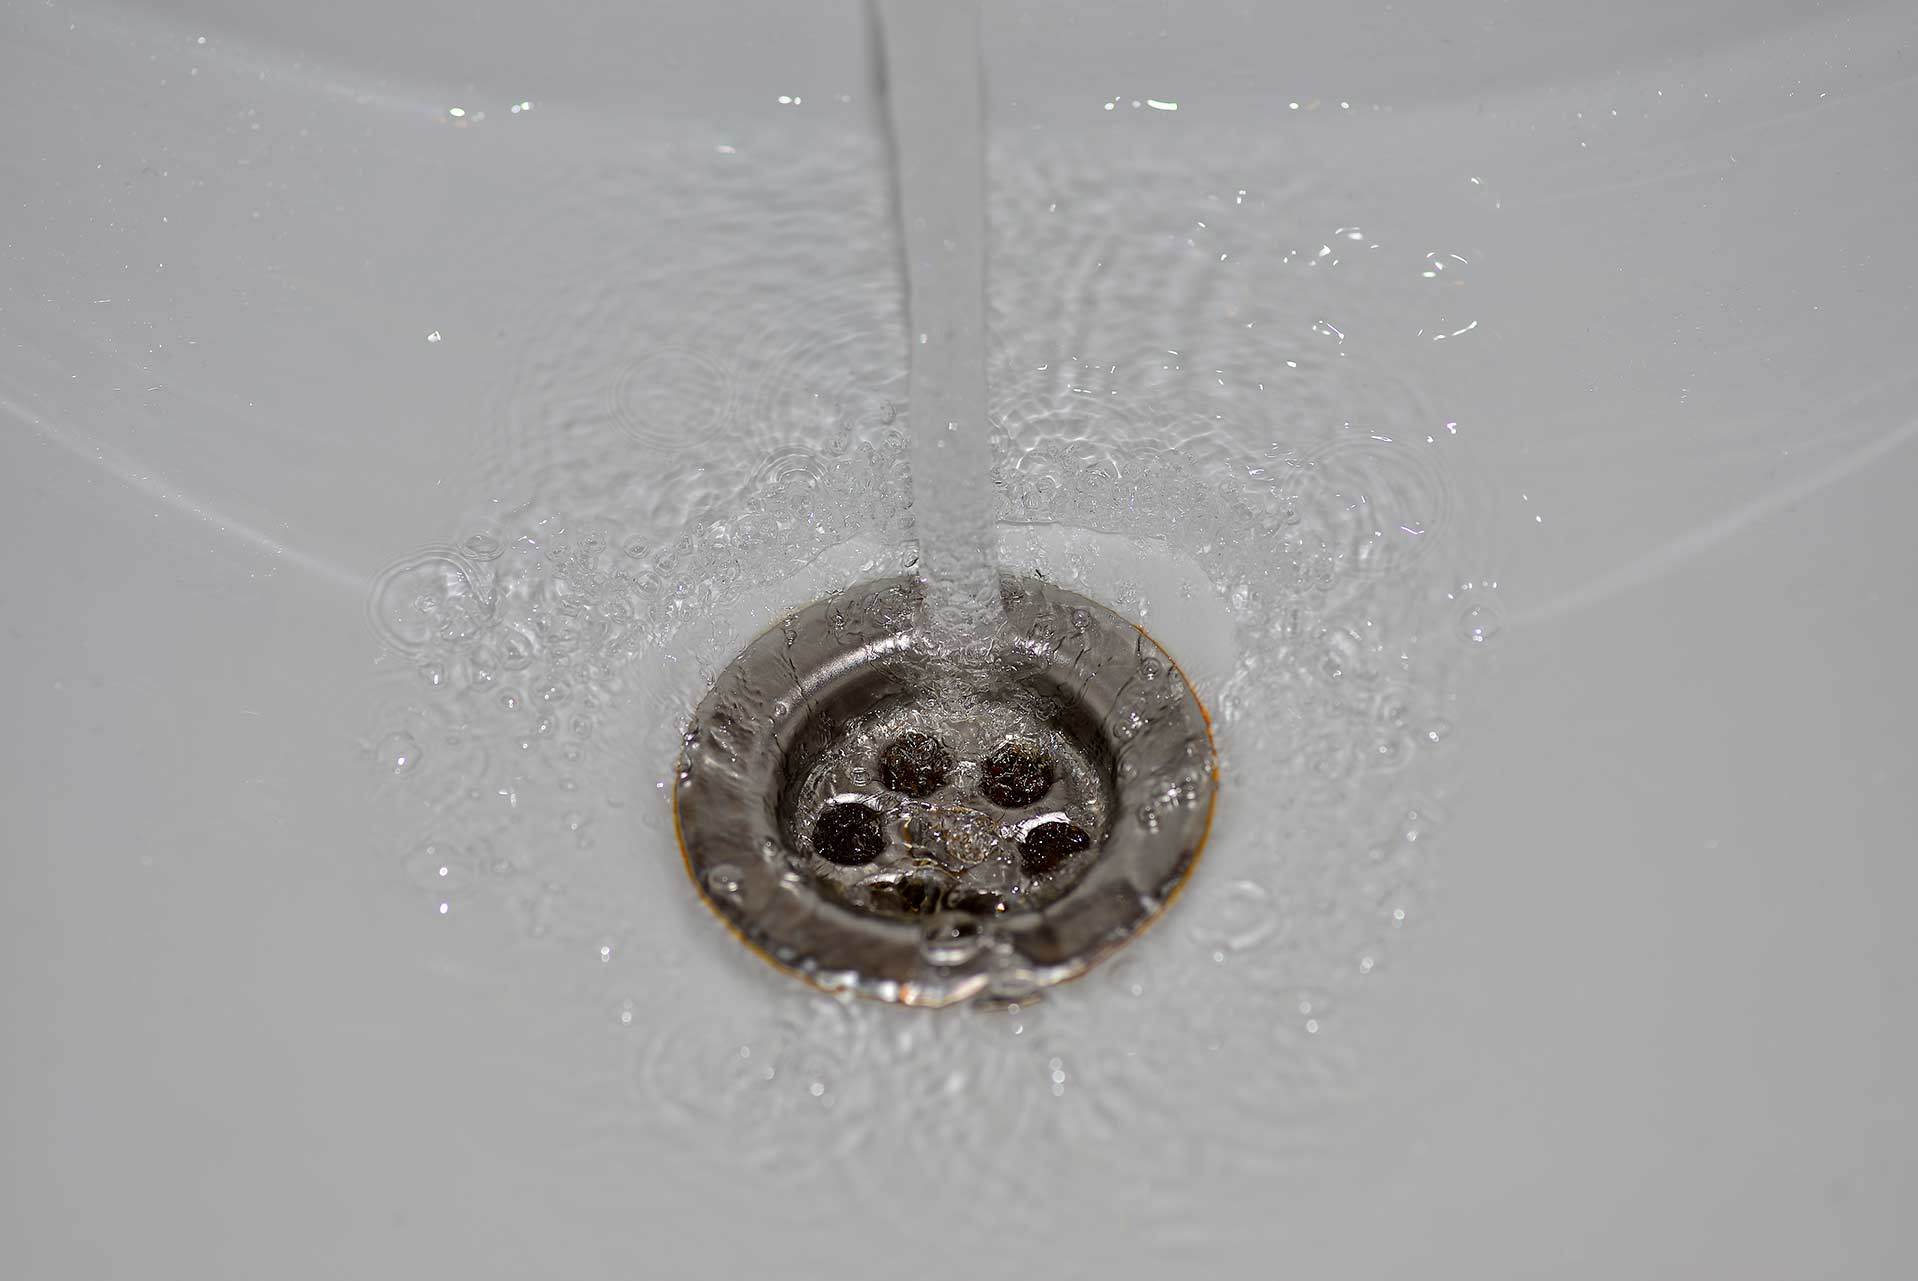 A2B Drains provides services to unblock blocked sinks and drains for properties in Wokingham.